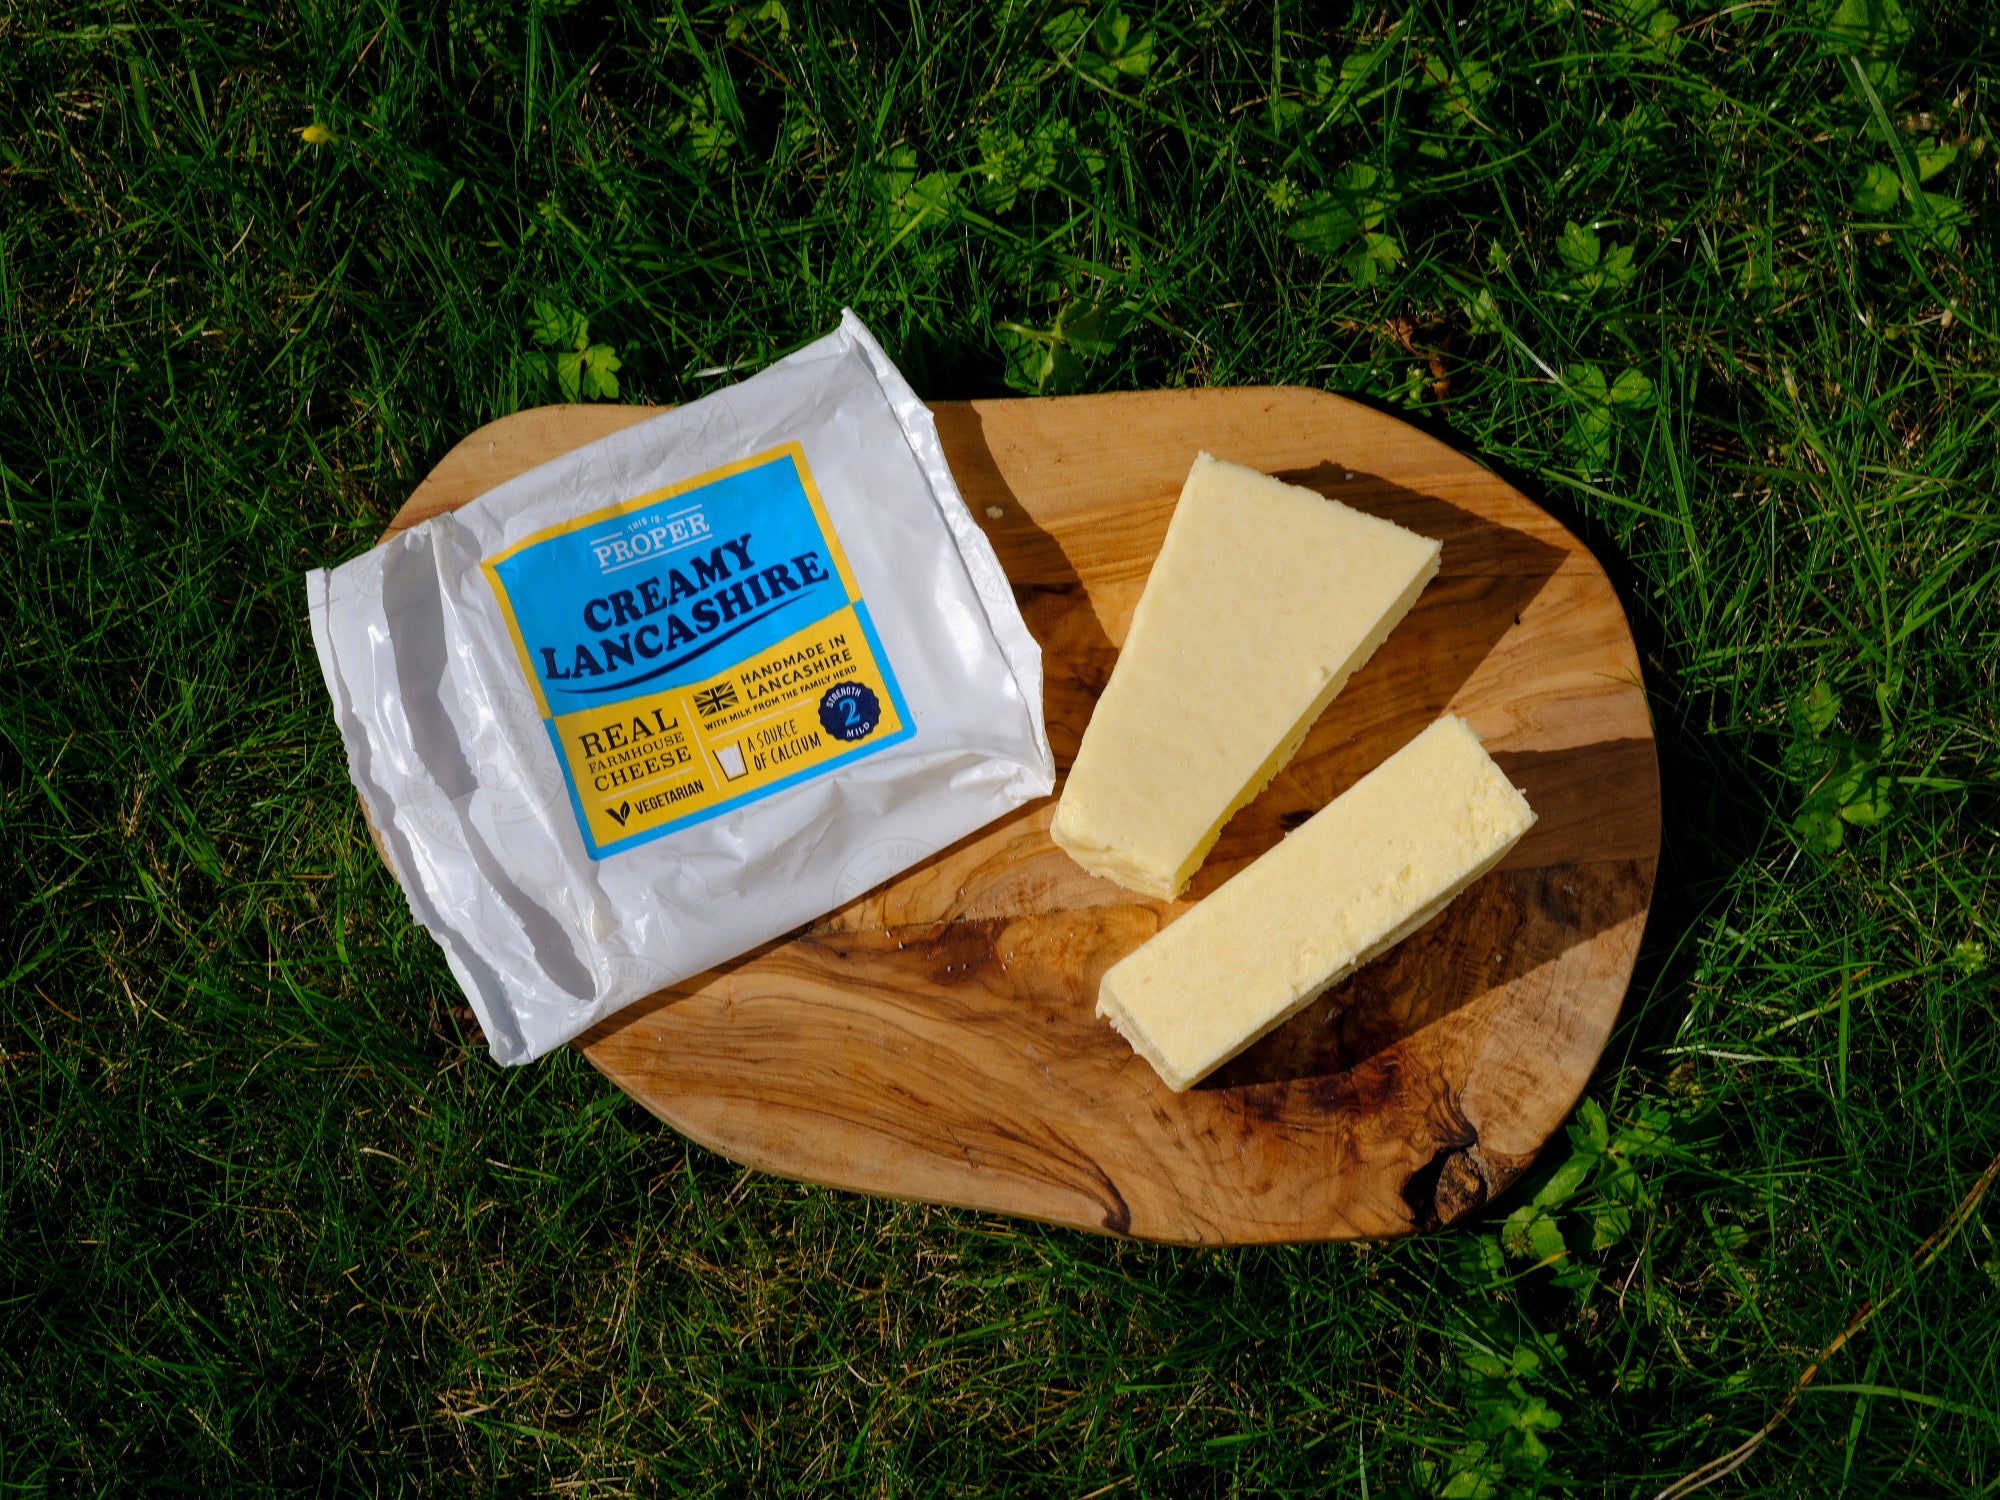 This is Proper Creamy Lancashire cheese, taken from it's packet and sliced on a wooden cheeseboard.